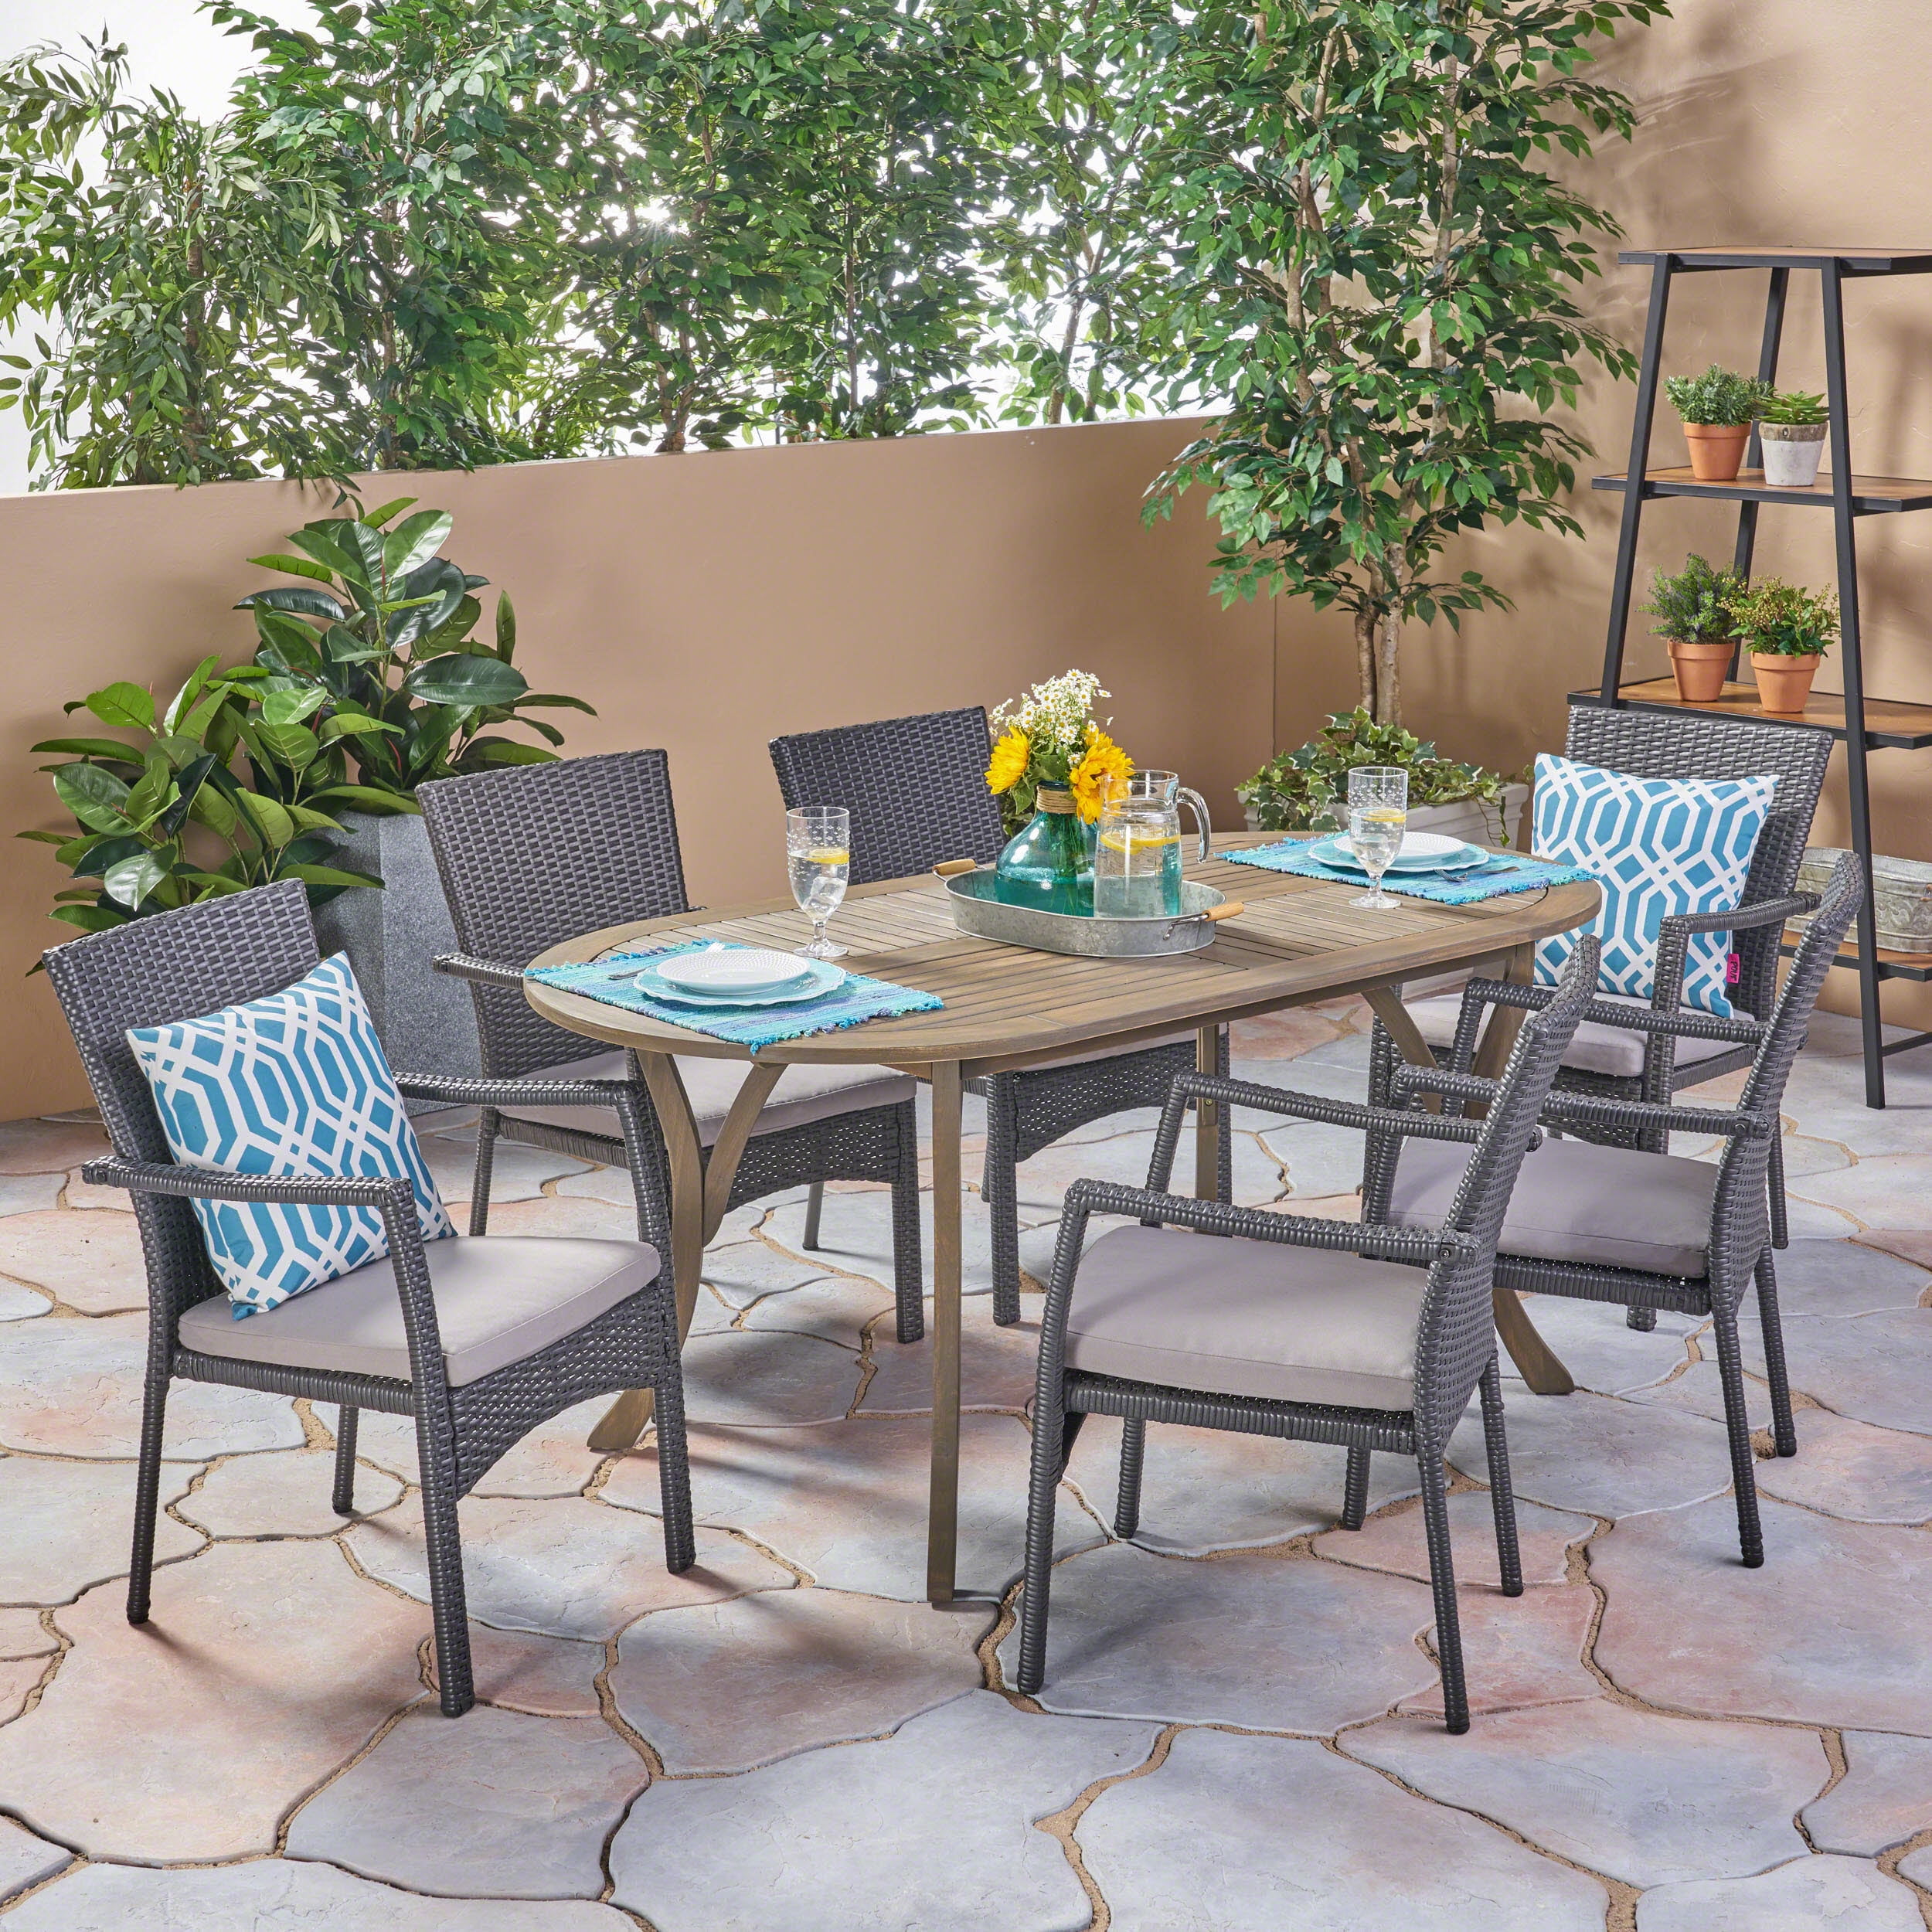 Lyndell Outdoor 7 Piece Acacia Wood Dining Set with Wicker Chairs and ...